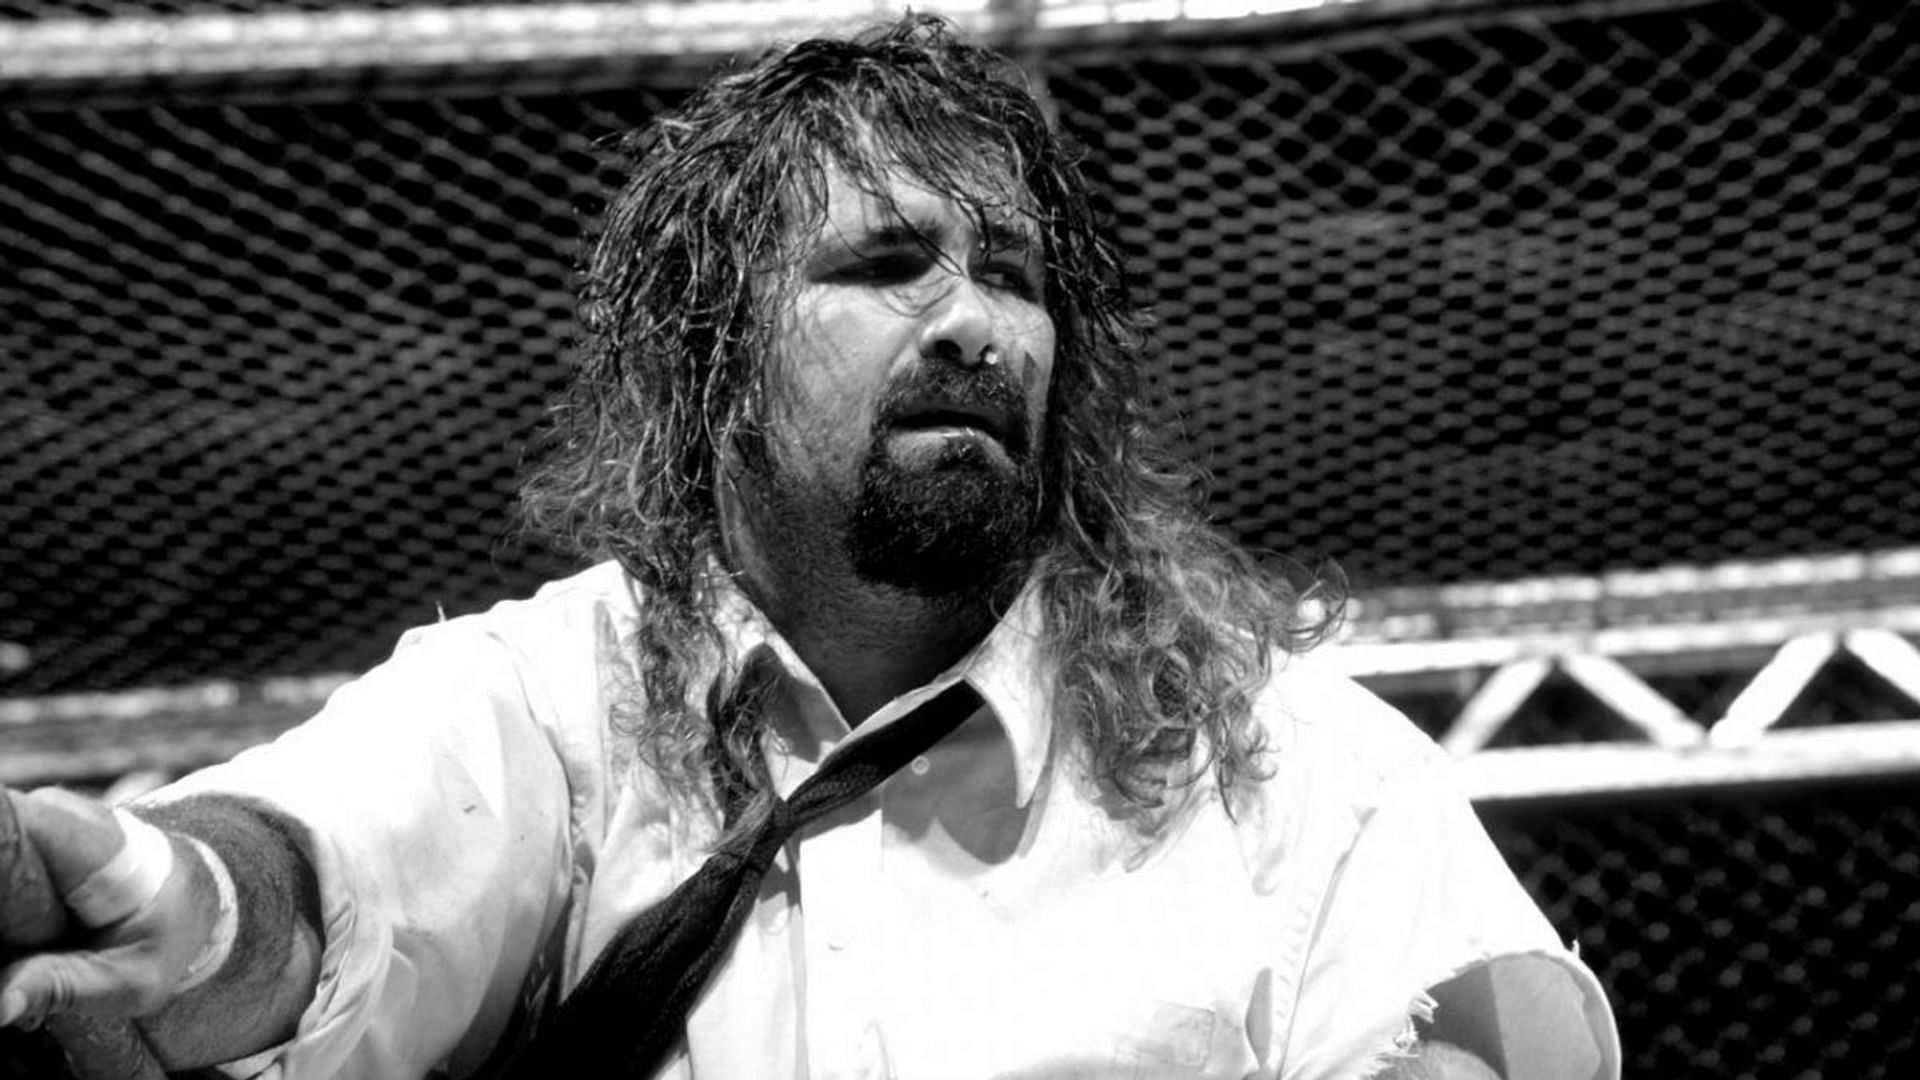 Foley&#039;s death defying performance immortalised him as a legend despite coming up short against The Undertaker